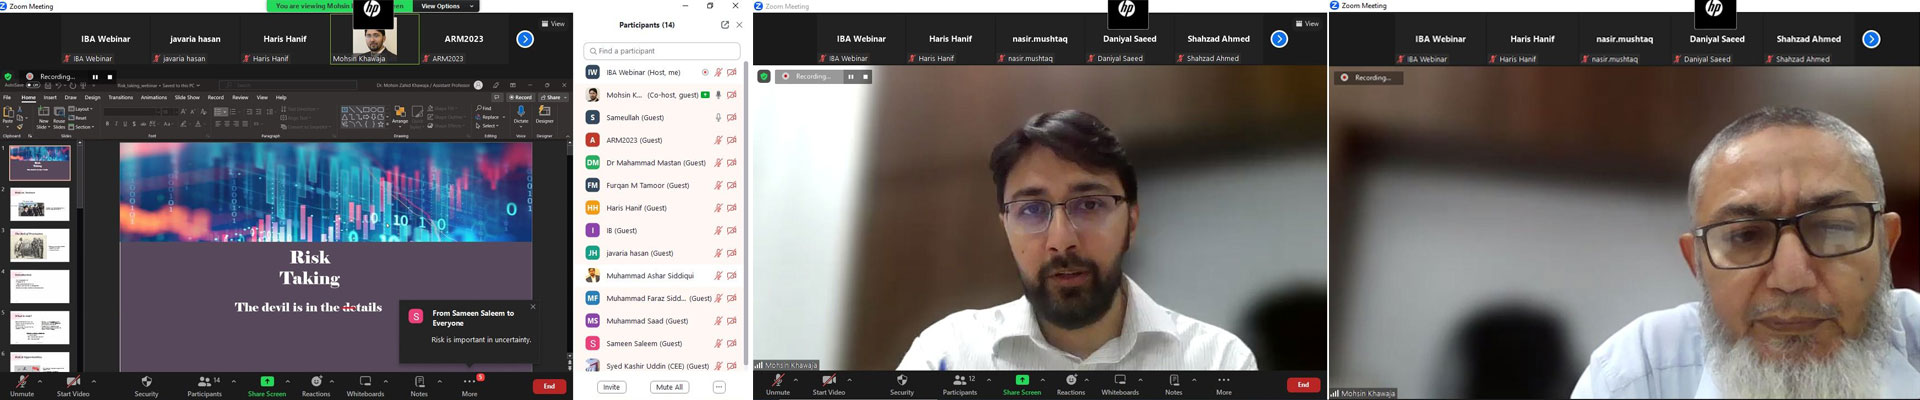 The Center of Executive Education at IBA conducted a webinar on Risk Management